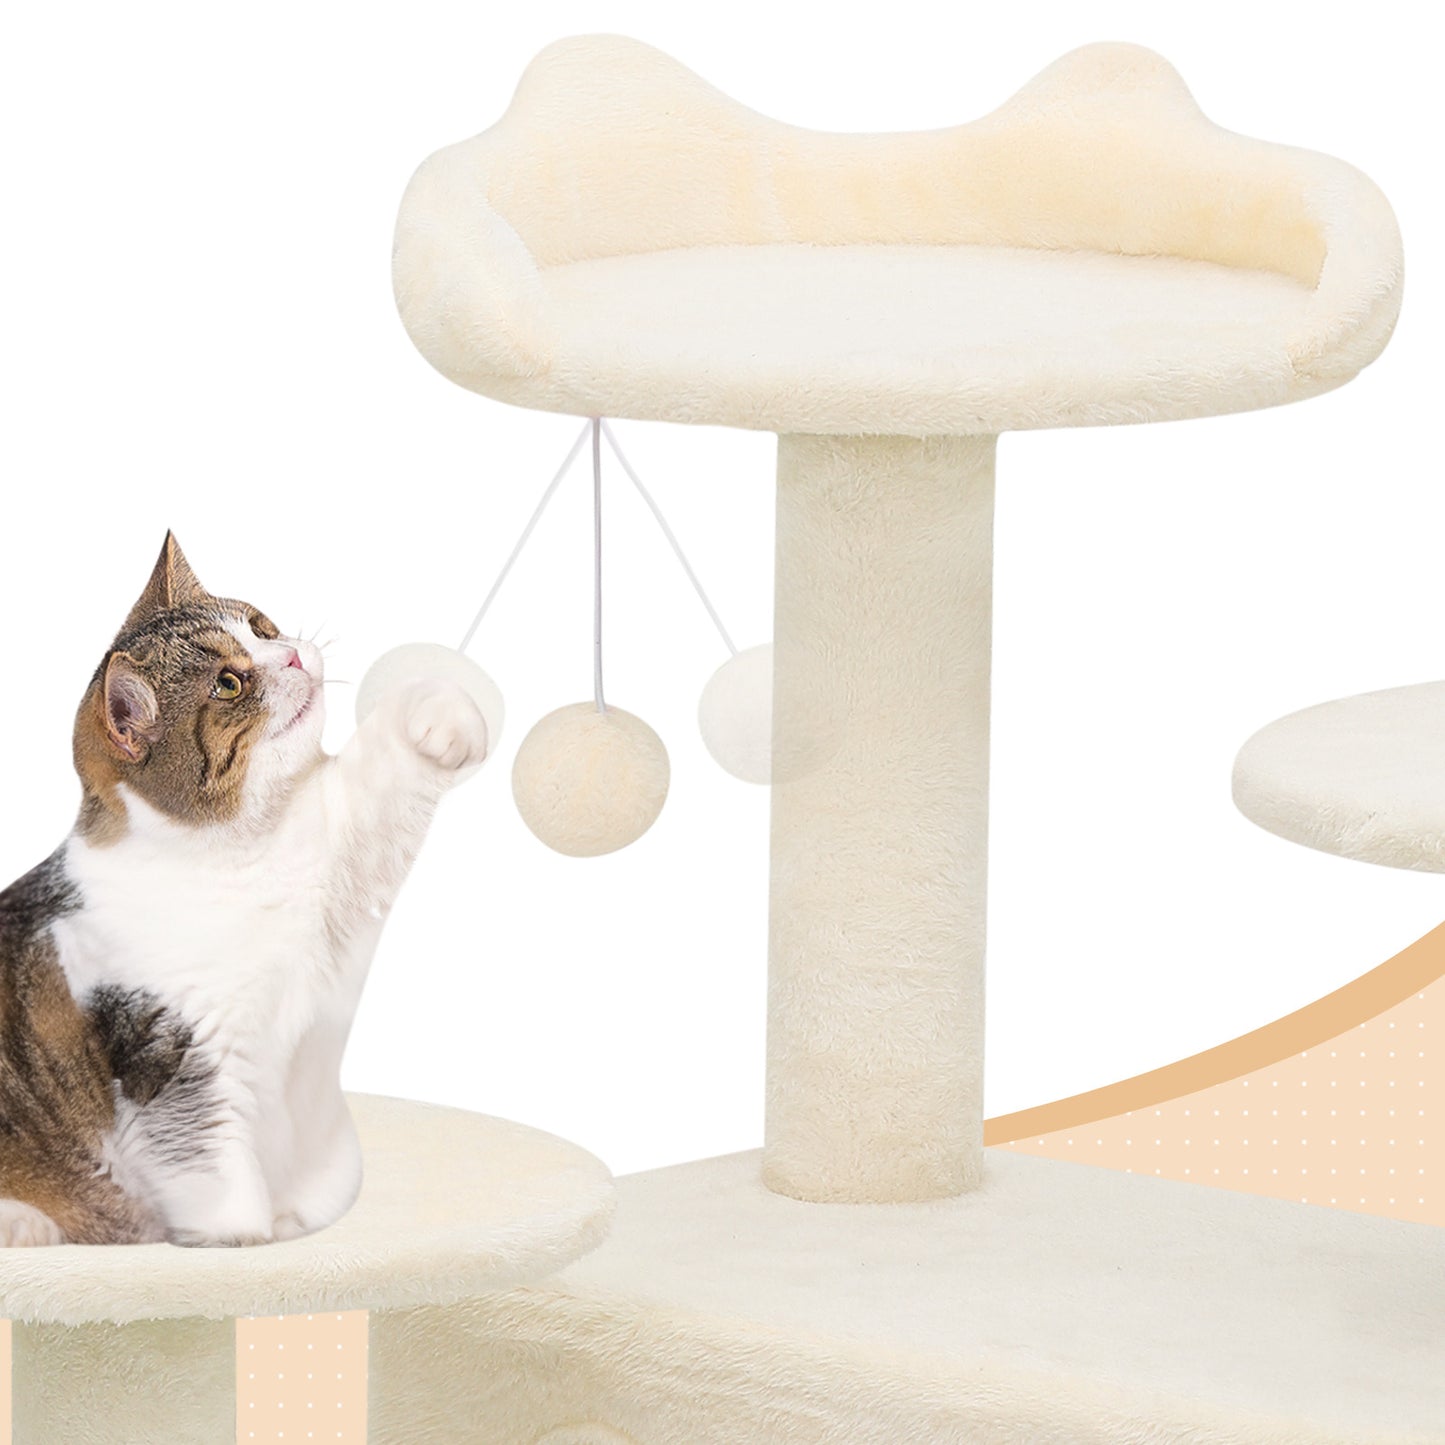 Cat Tree - 70'' Height - w/Anti-Tipping Rope, Fabric Scratching Post